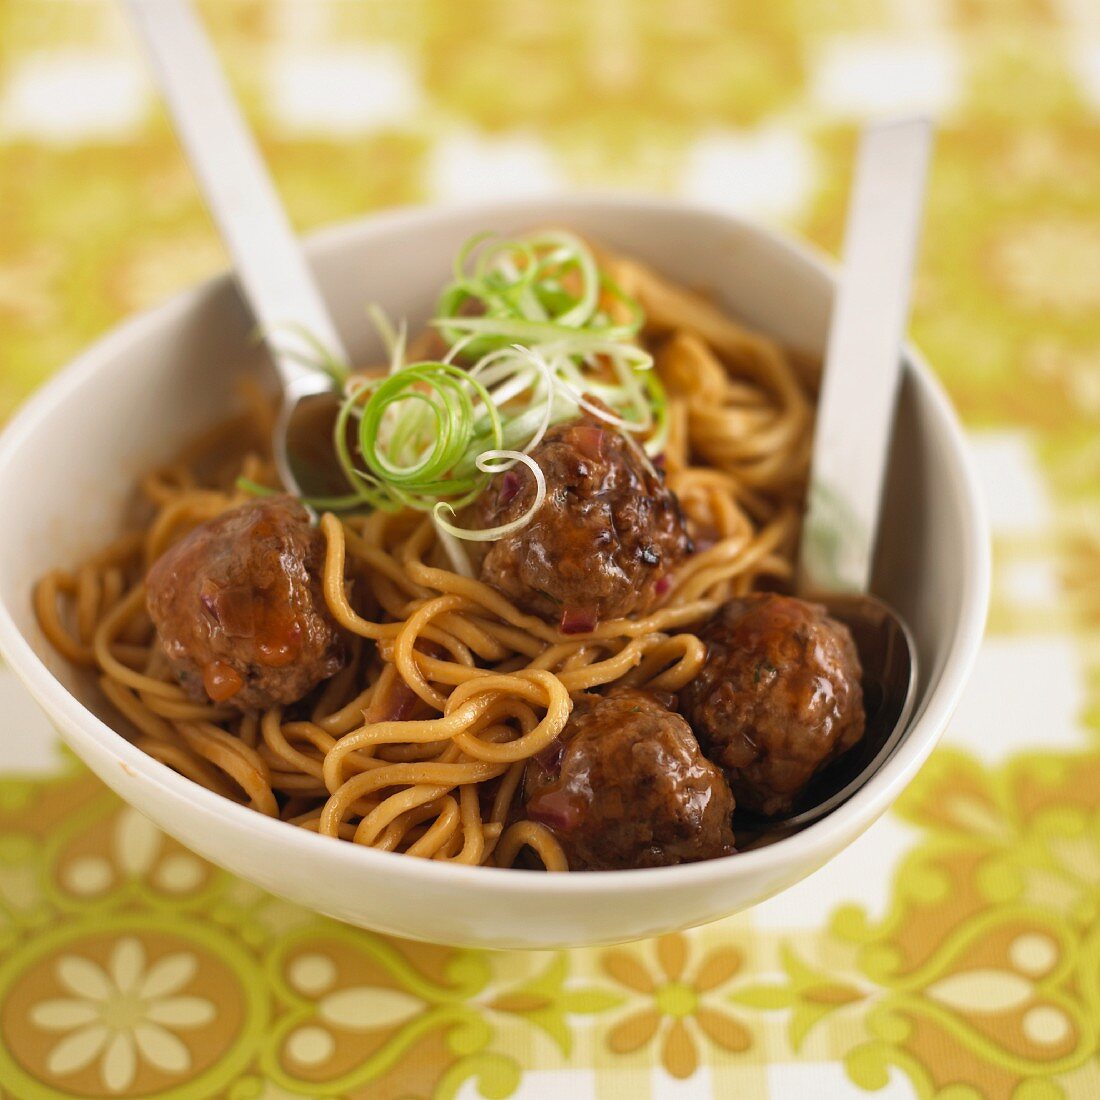 Noodles with meatballs